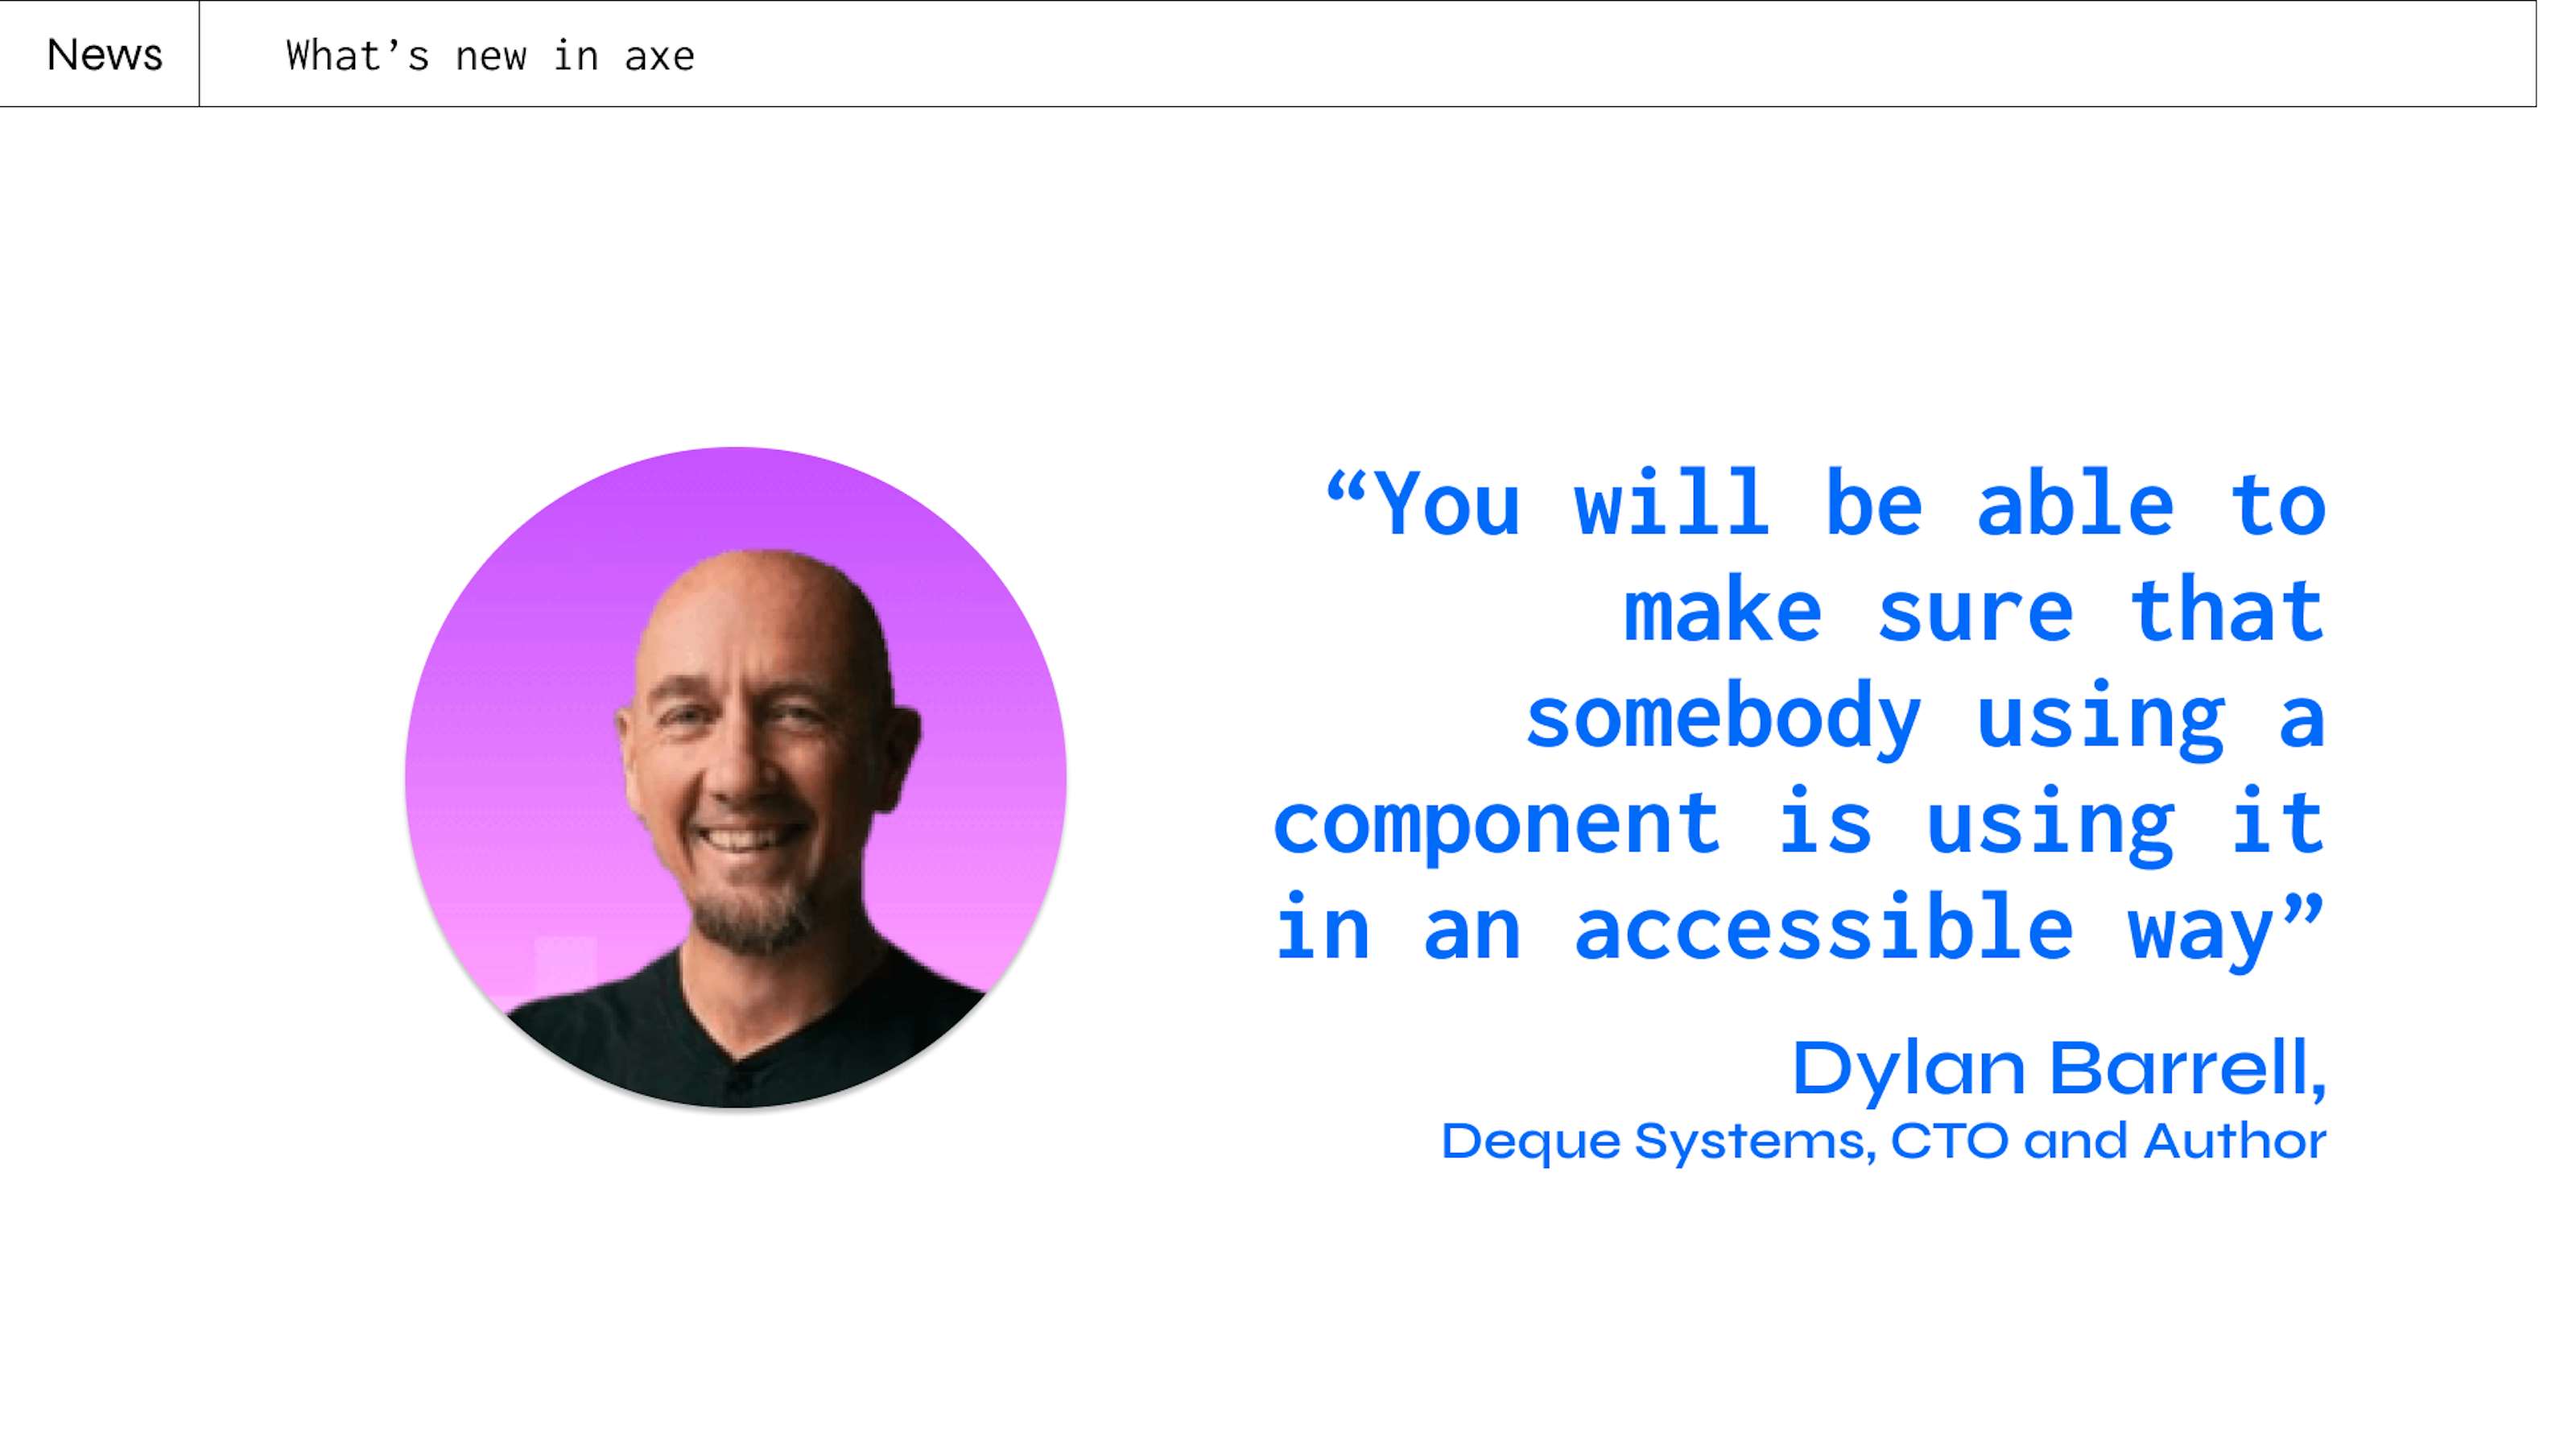 a quote from Dylan Barrell's talk at axe-con "You will be able to make sure that somebody using a component is using it in an accessible way”